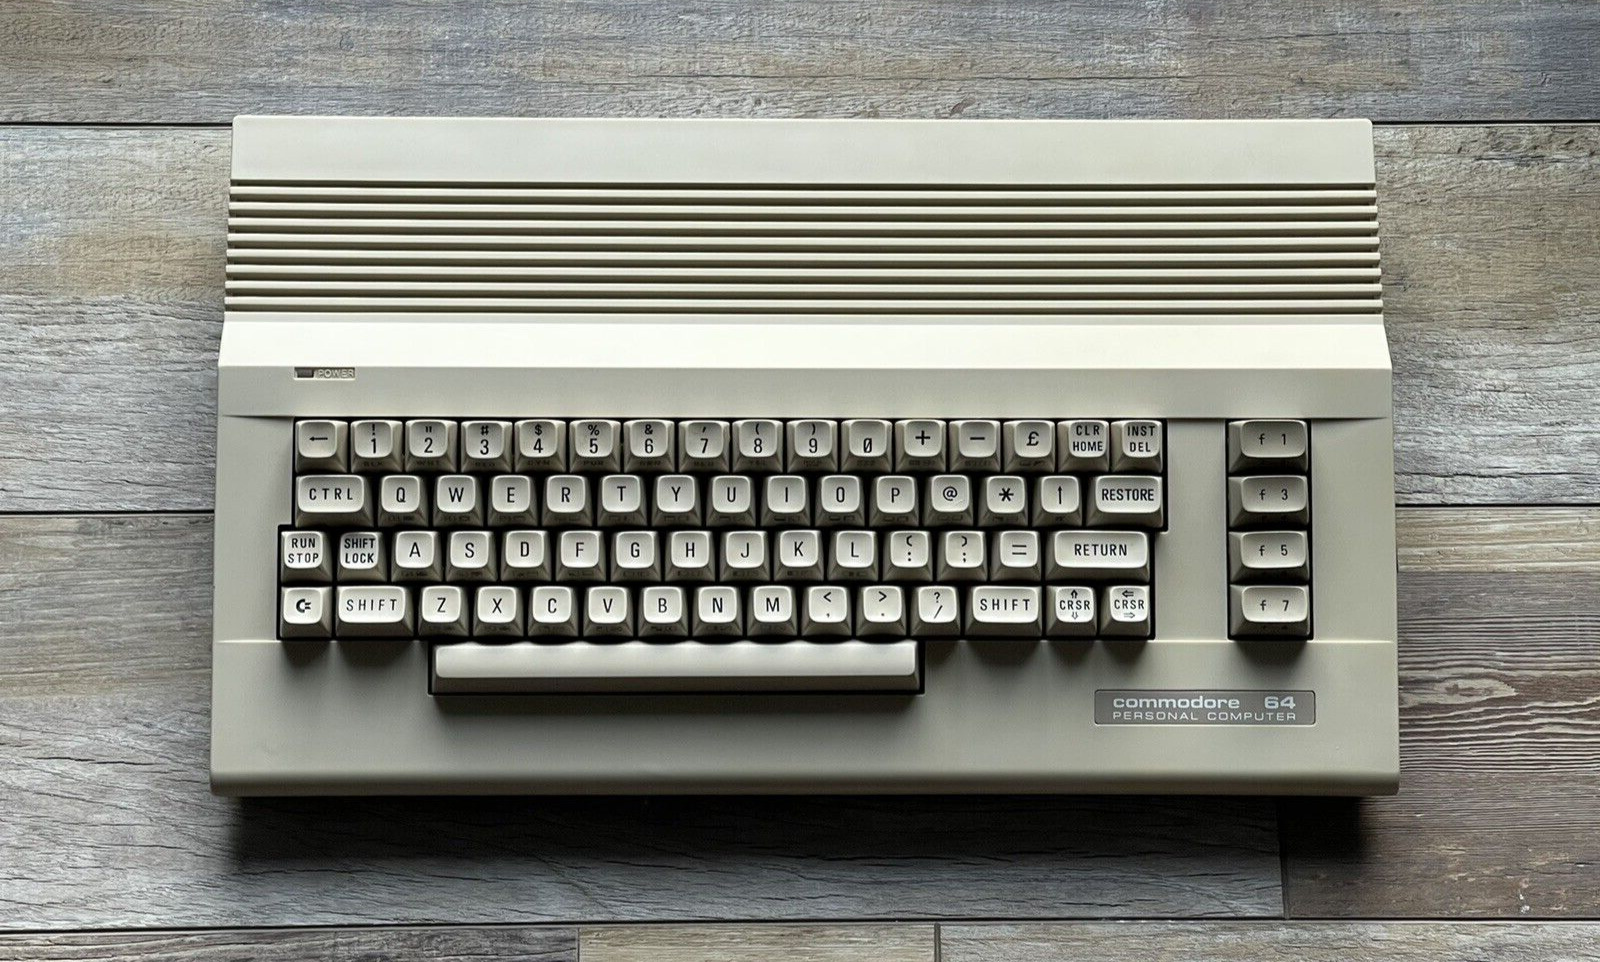 Commodore 64C computer | Professionally cleaned, recapped, and tested | NTSC